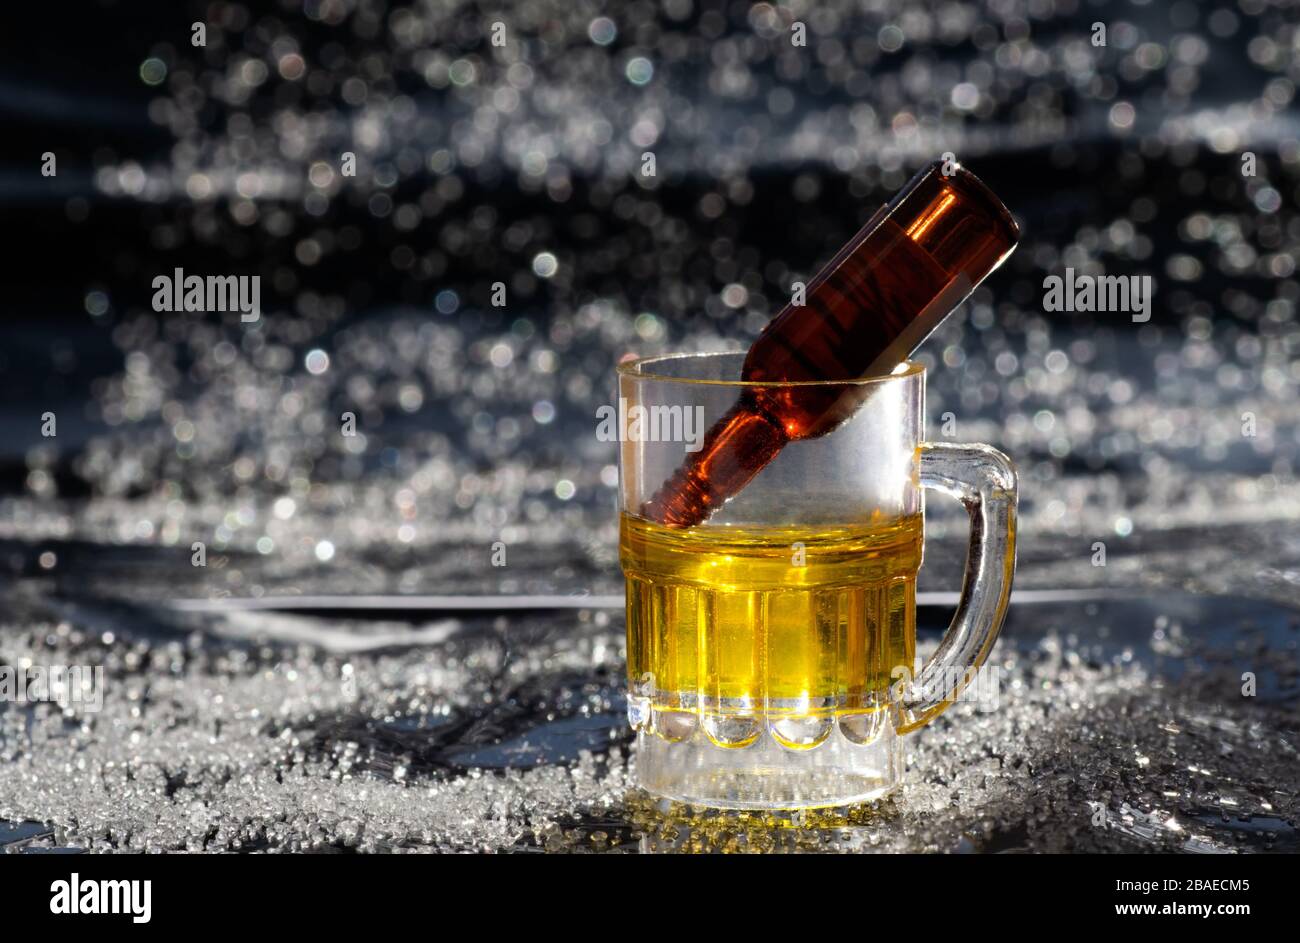 A miniature bottle in a small beer mug. Alcoholism and moderate consumption problem Stock Photo